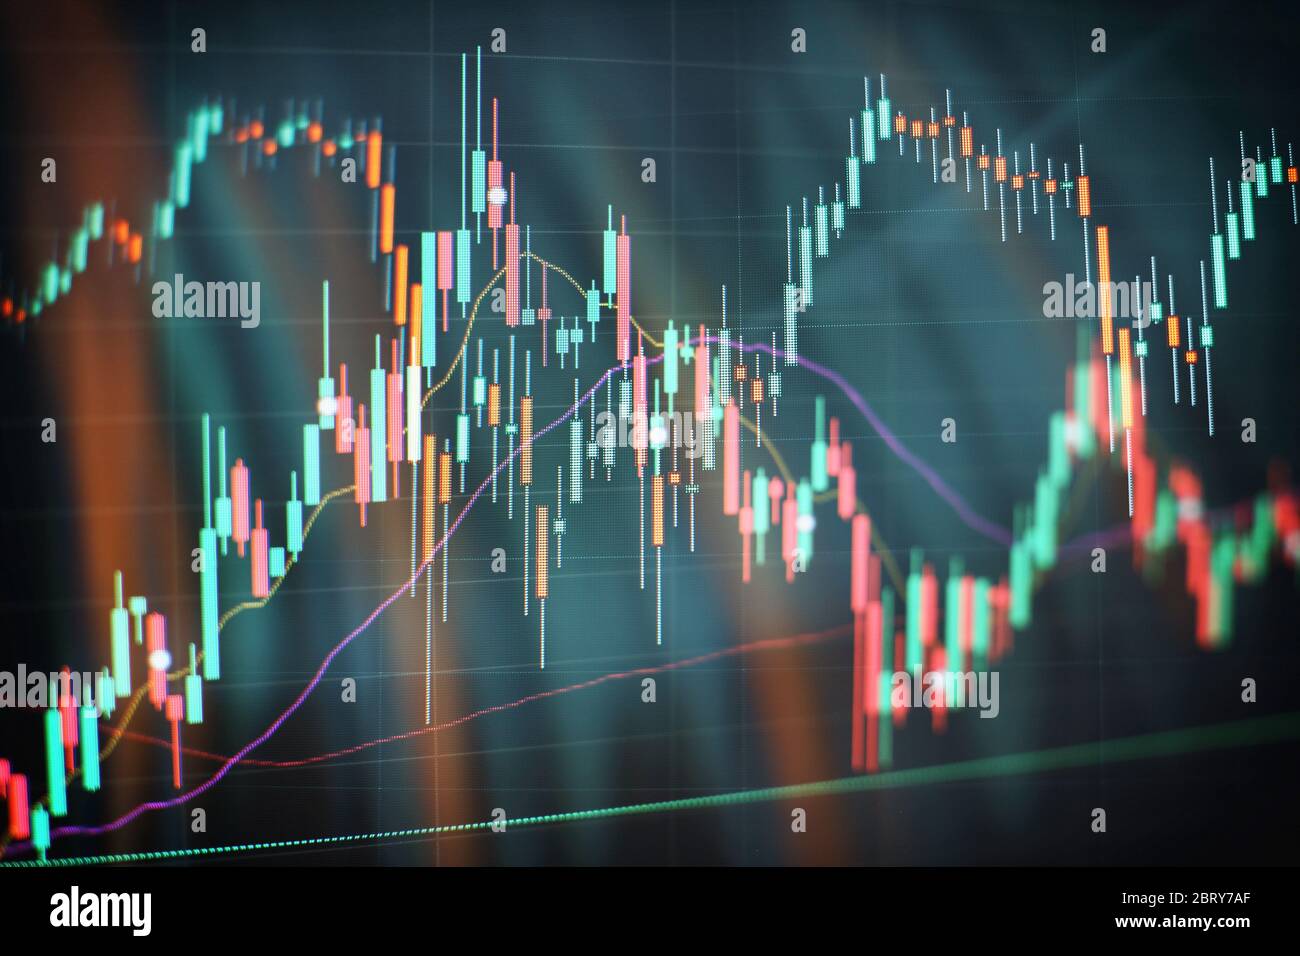 Abstract Glowing Forex Chart Interface Wallpaper. Investment, Trade, Stock,  Finance And Analysis Concept. Stock Photo, Picture And Royalty Free Image.  Image 122146132.